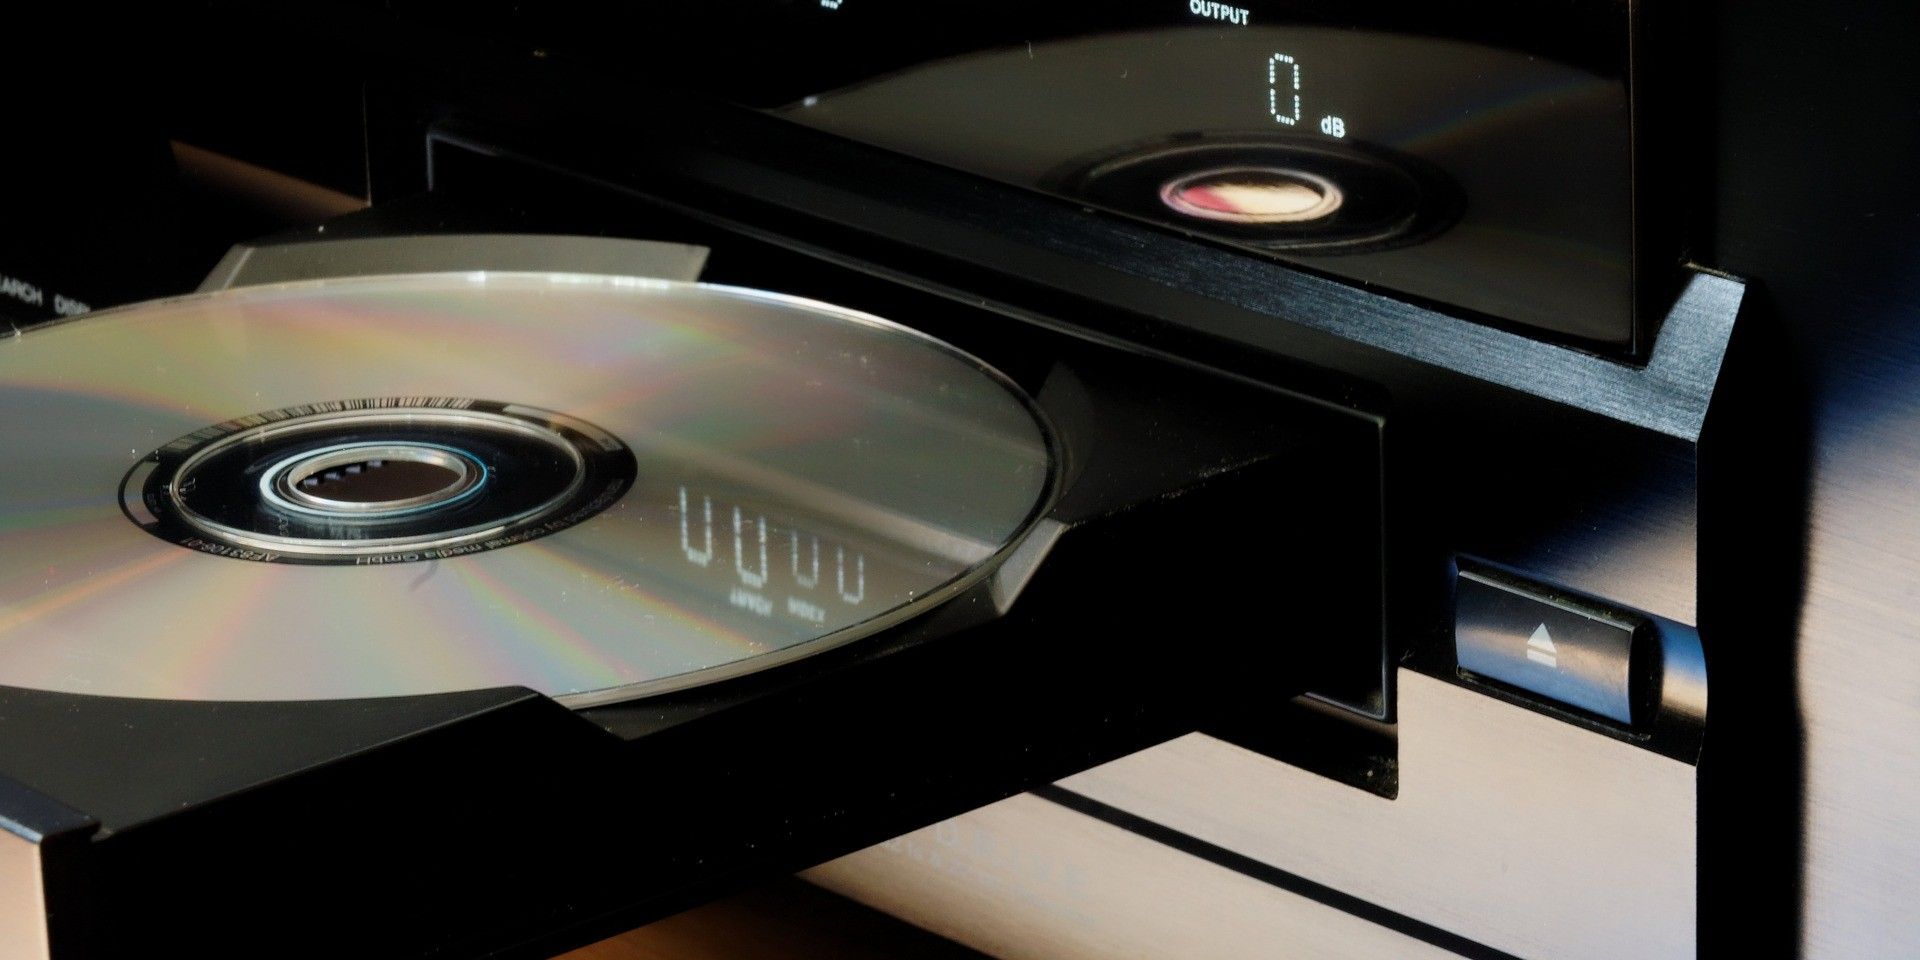 CD Player with disc tray open